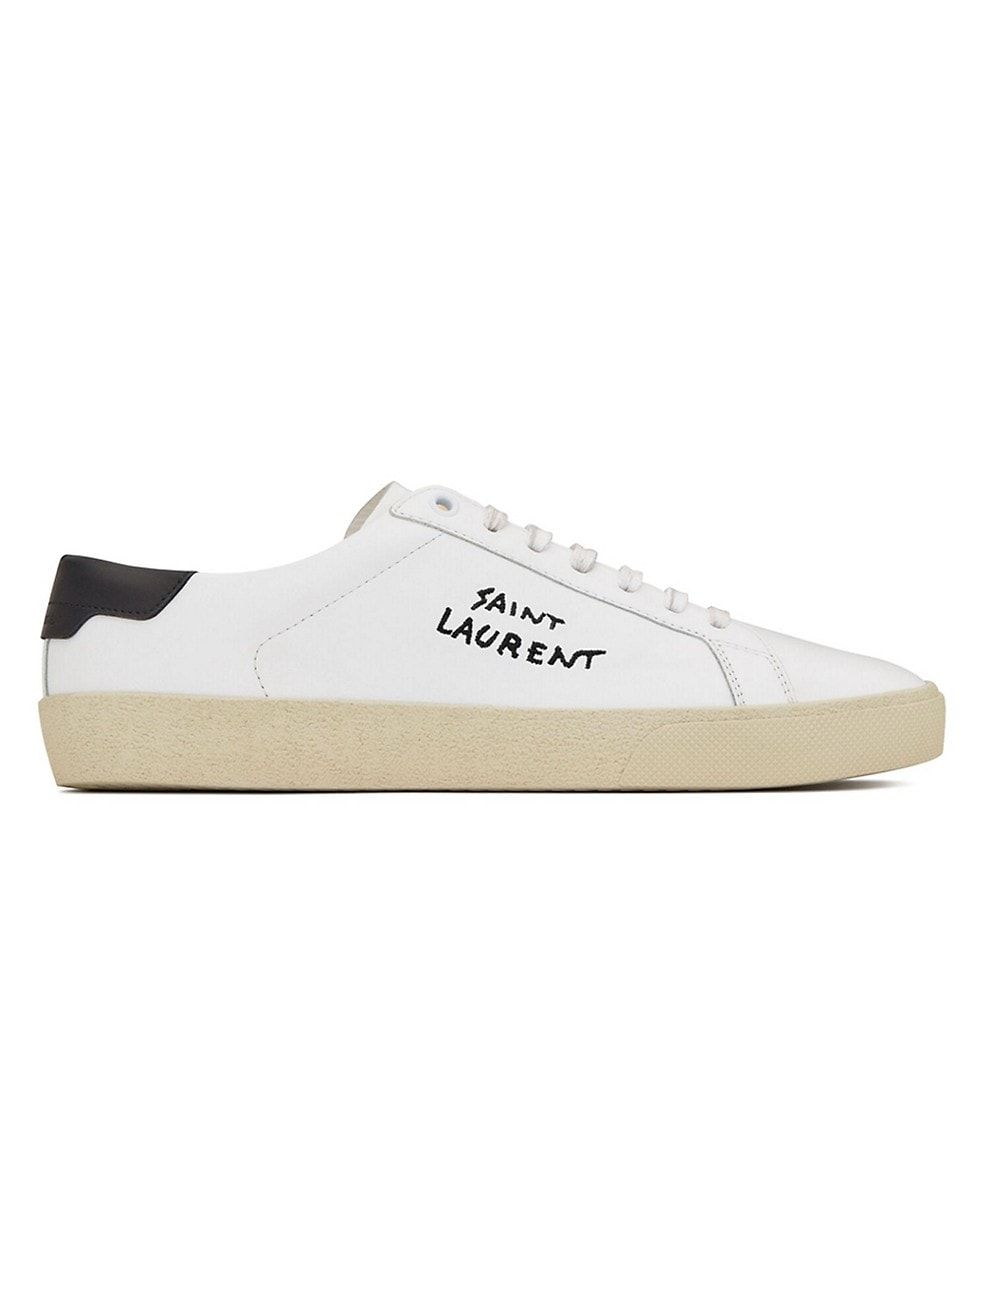 Saint Laurent Court Classic Sl/06 Embroidered Sneakers In Leather | Saks Fifth Avenue